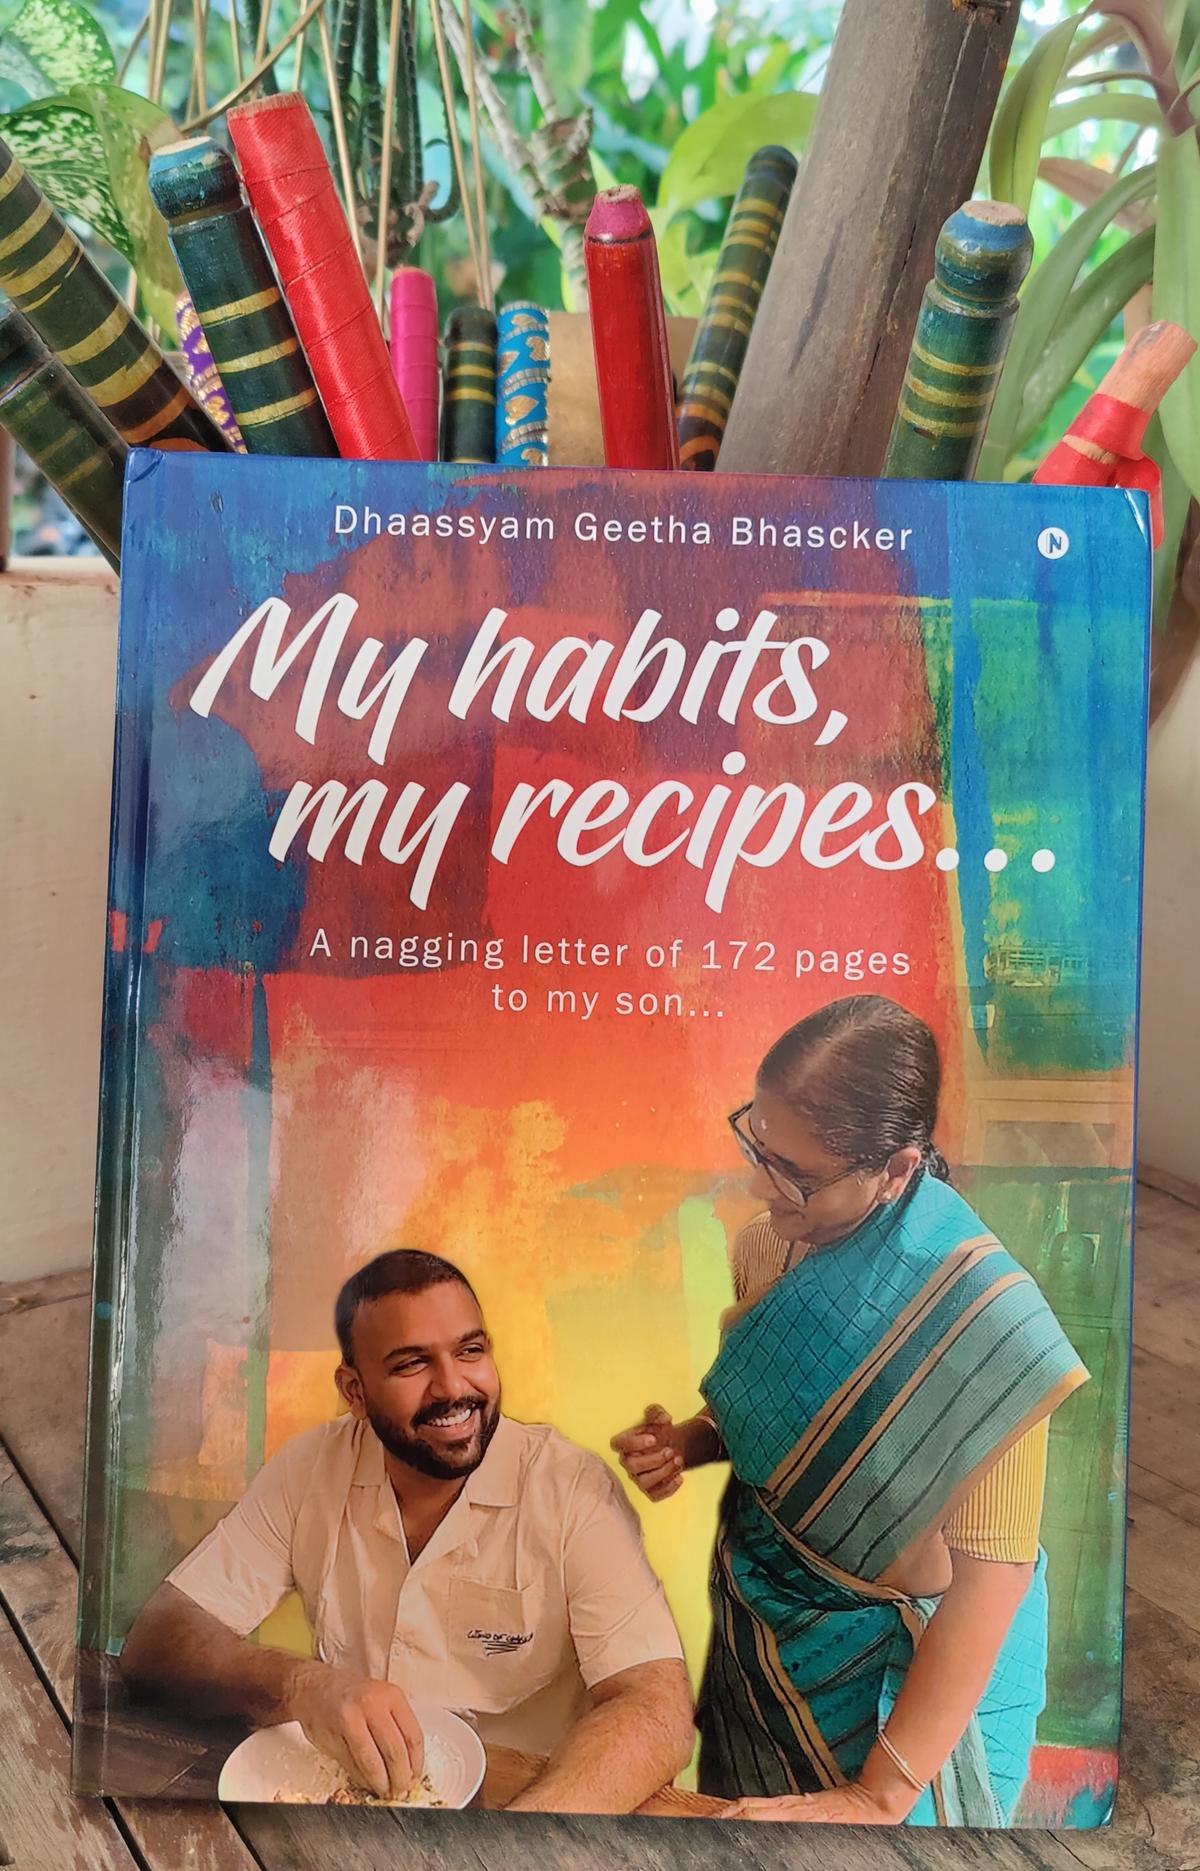 The book ‘My Habits, My Recipes’